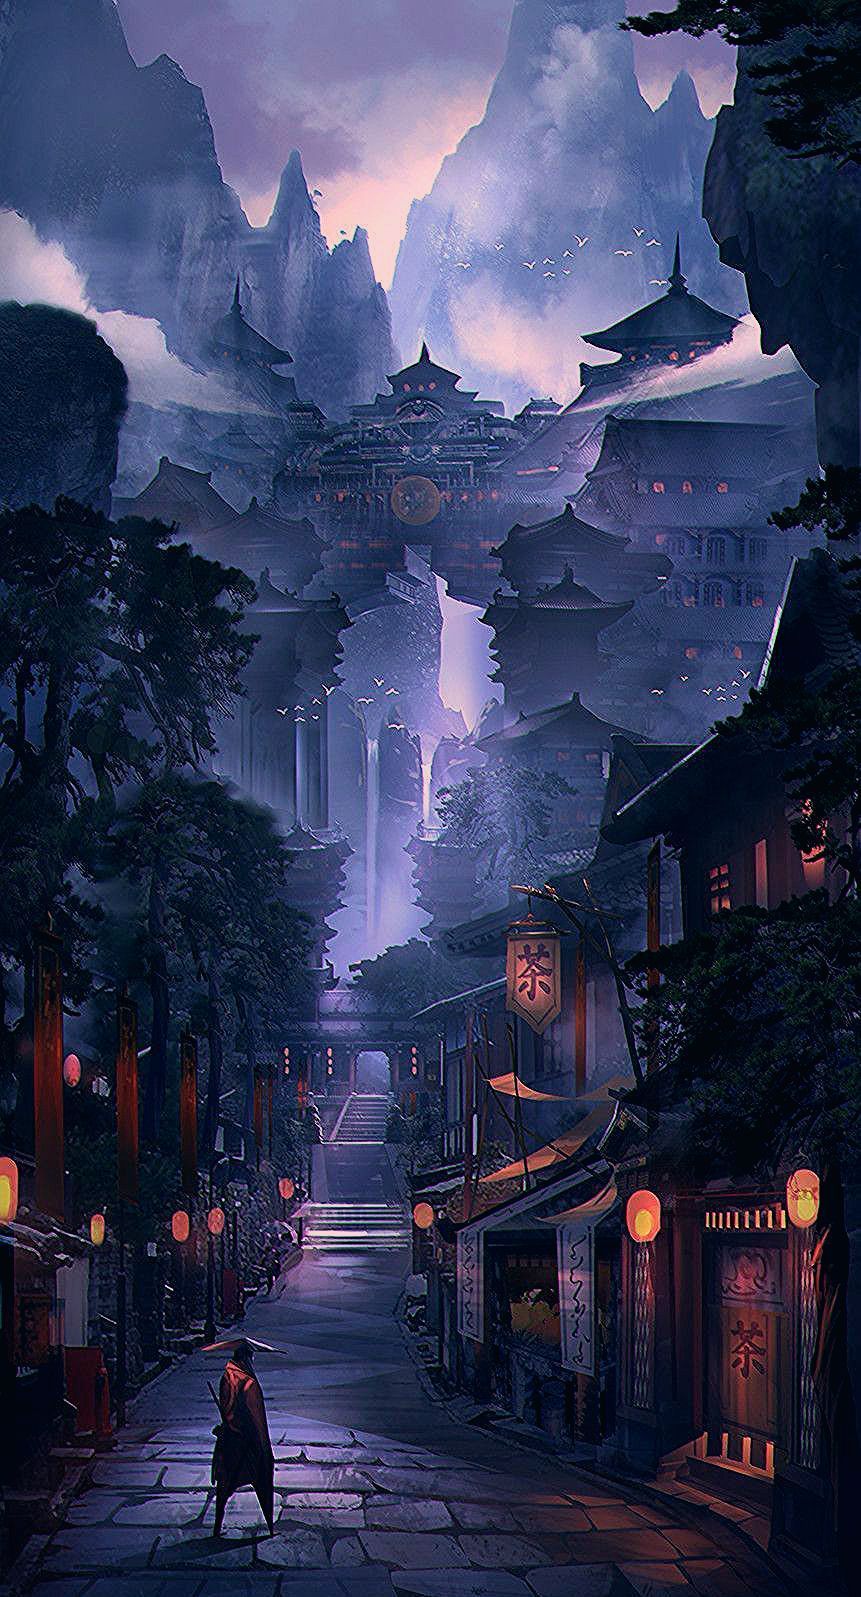 Wencheng Y on. Android Wallpaper Android Wallpaper, presentamos la mejor imagen q. Beautiful wallpaper, Aesthetic background, Scenery